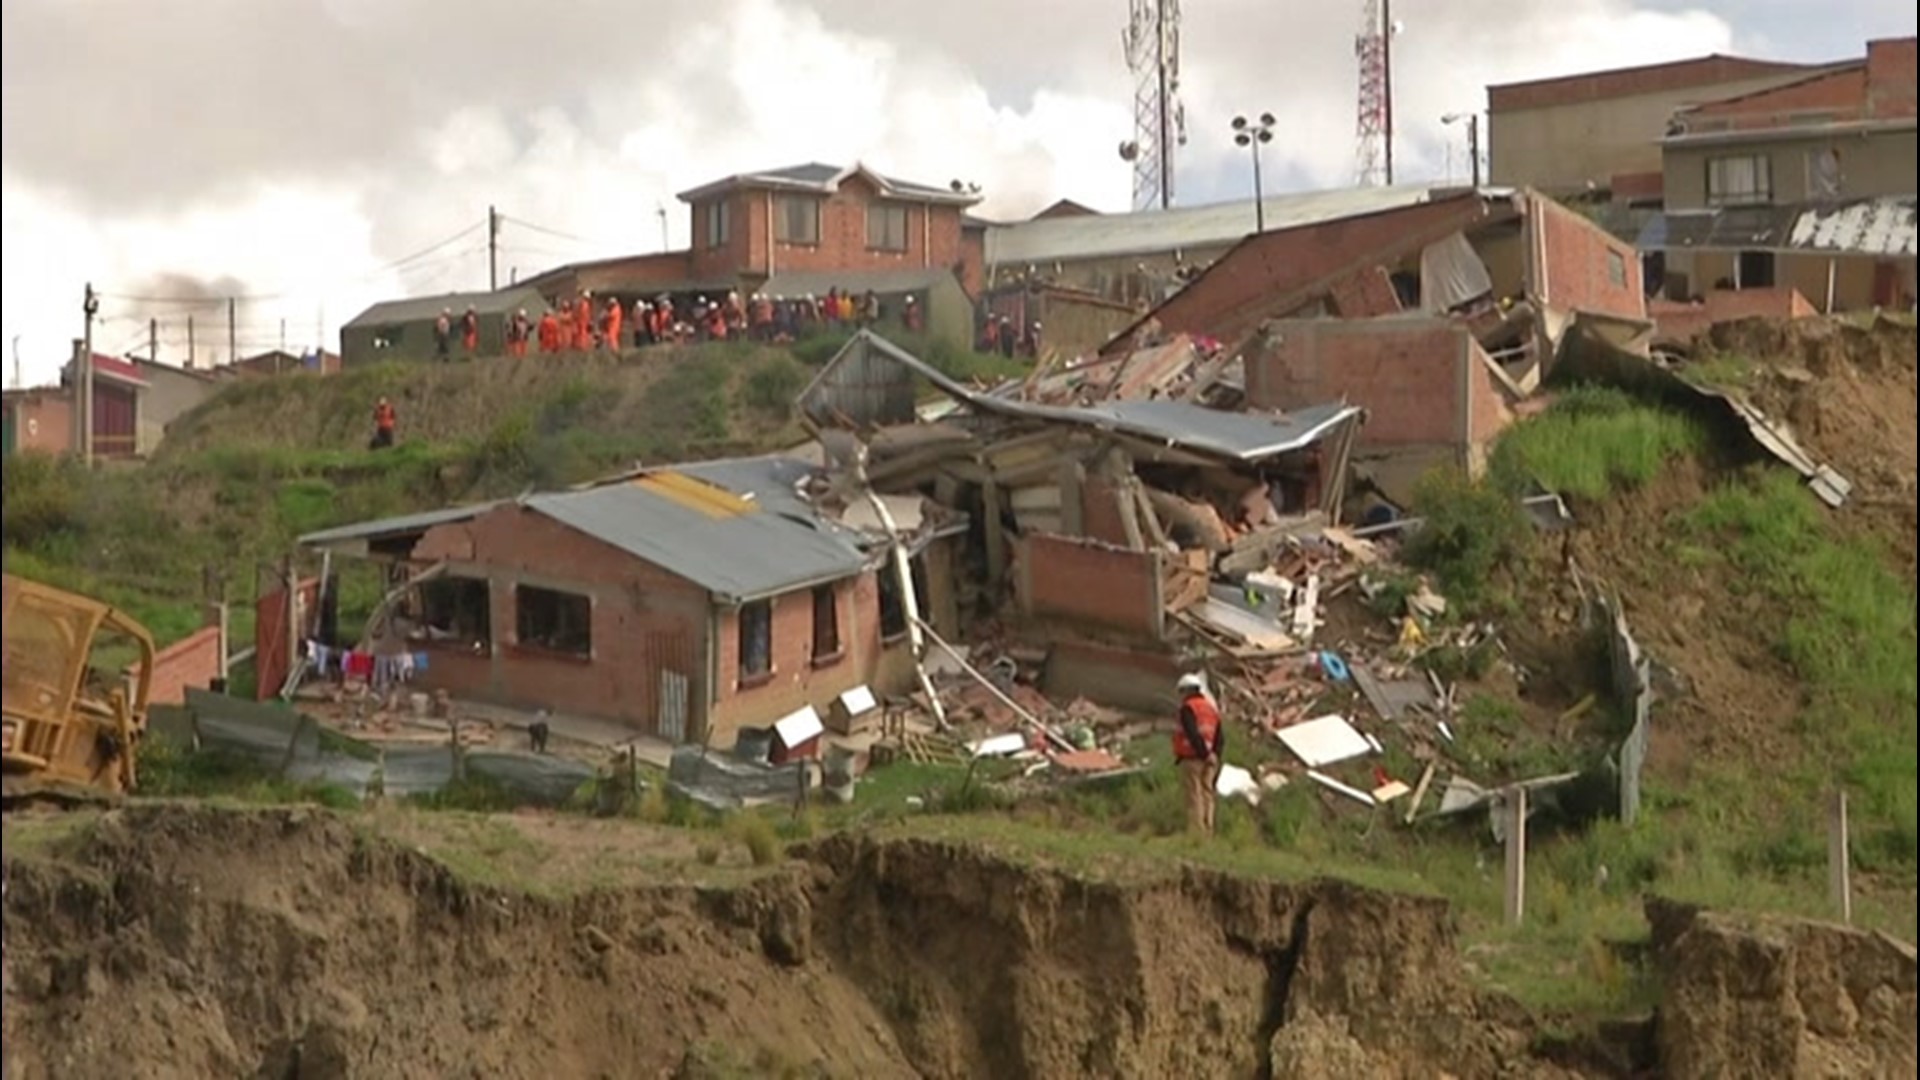 Multiple homes in La Paz, Bolivia, were destroyed after landslides caused them to collapse on Feb. 23 and 24. The landslides were caused by heavy rain, which loosened up the soil.